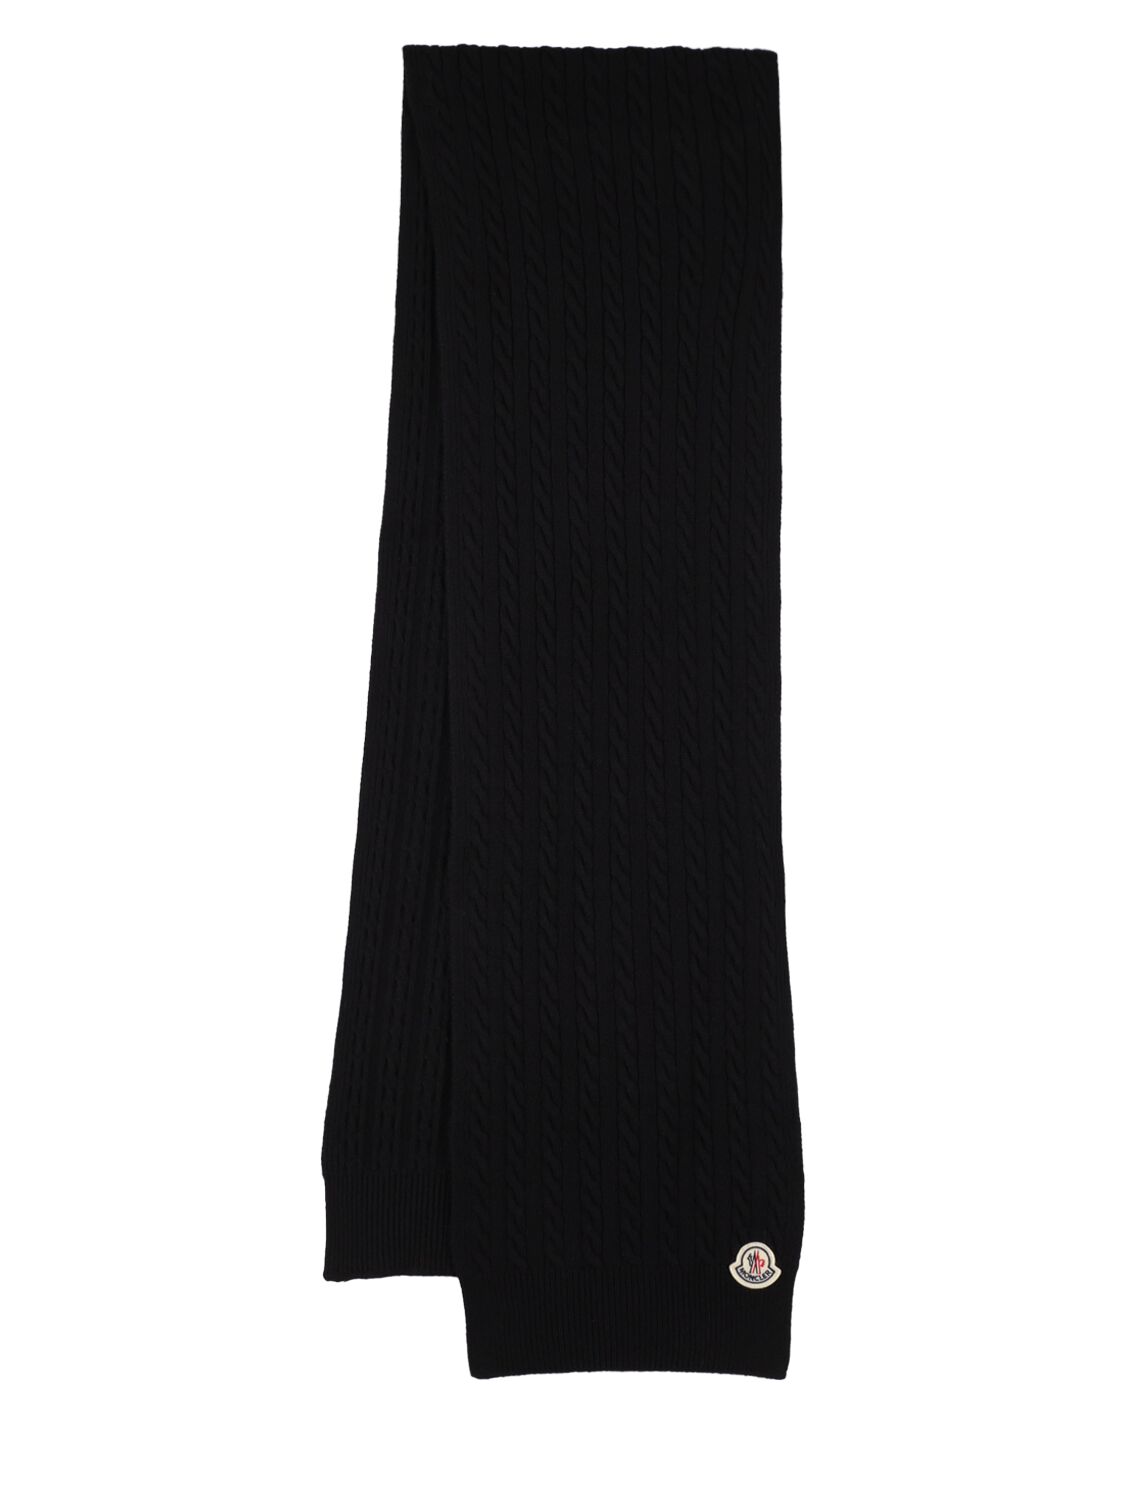 MONCLER WOOL & CASHMERE TRICOT SCARF